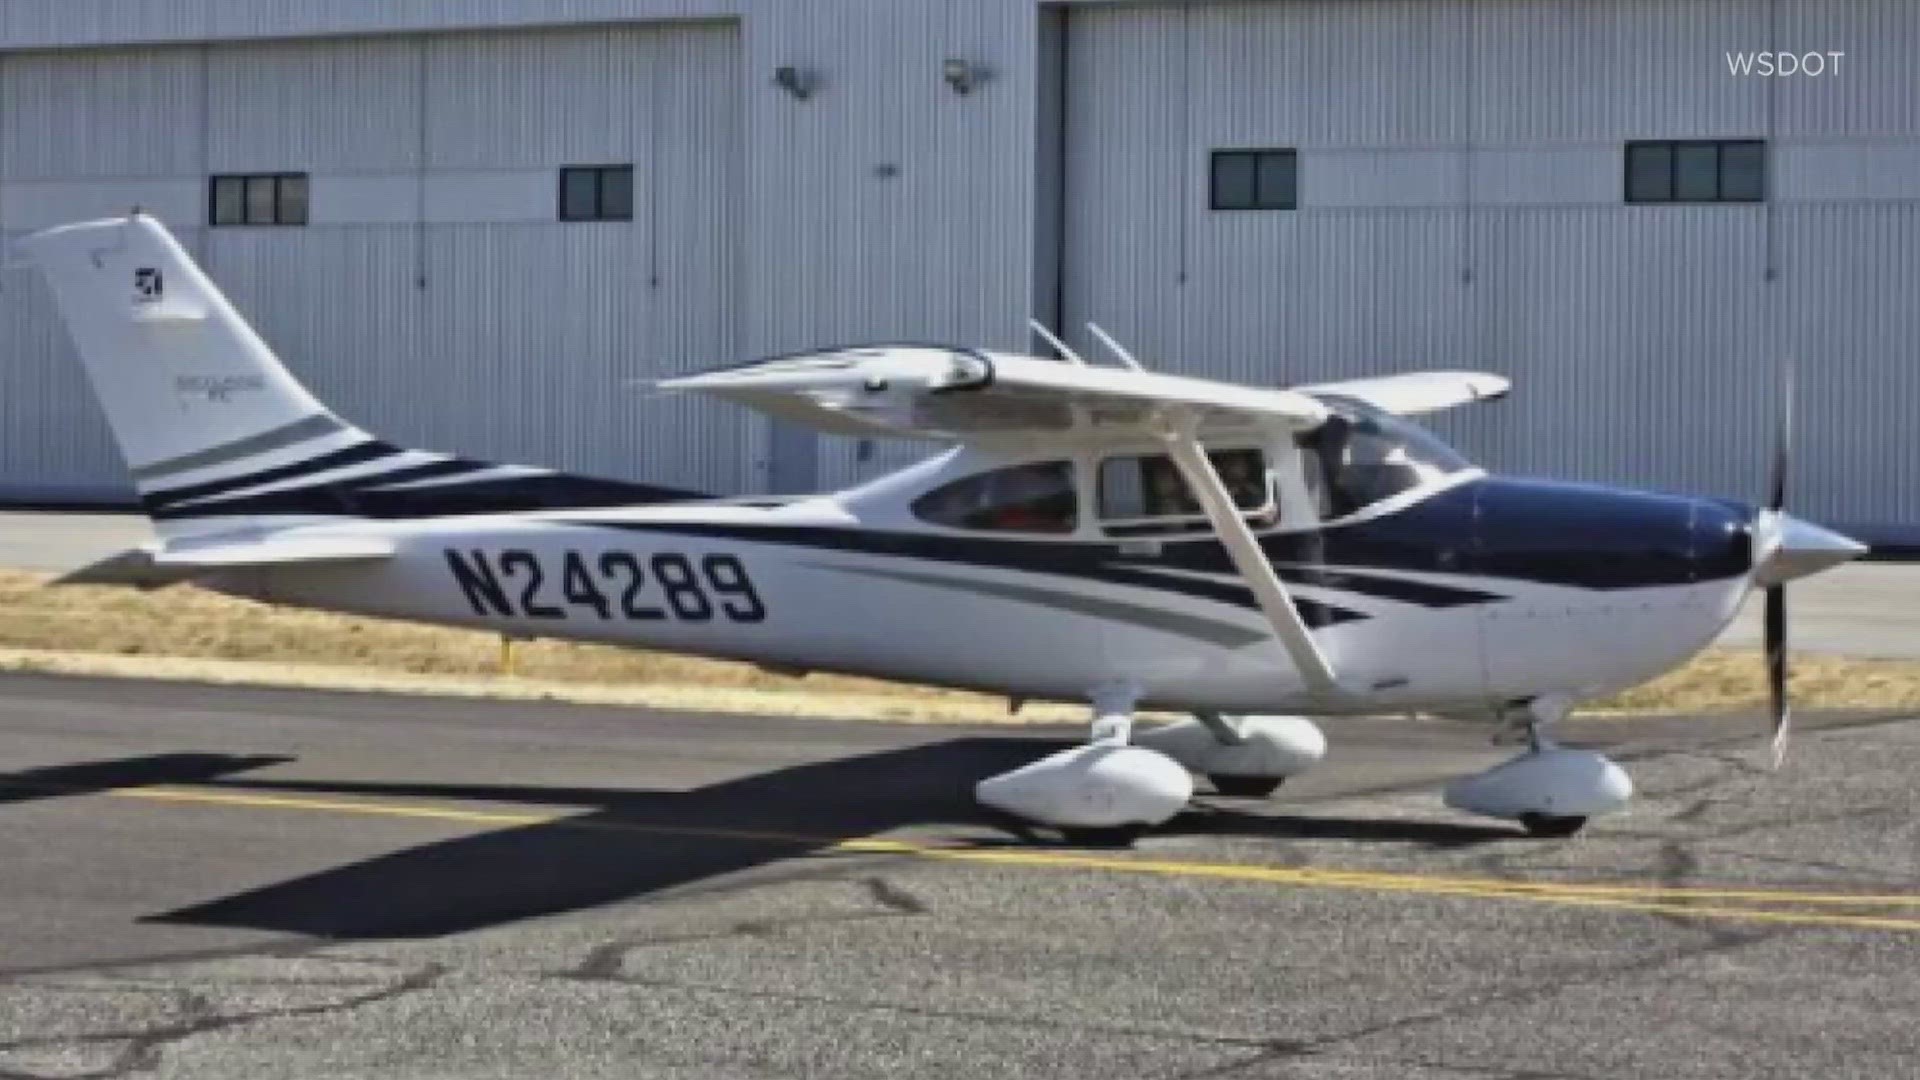 Search and rescue crews have been looking for pilot Rod Collen and his 2006 Cessna T182 Turbo Skylane for 13 days, but have found no trace of either.